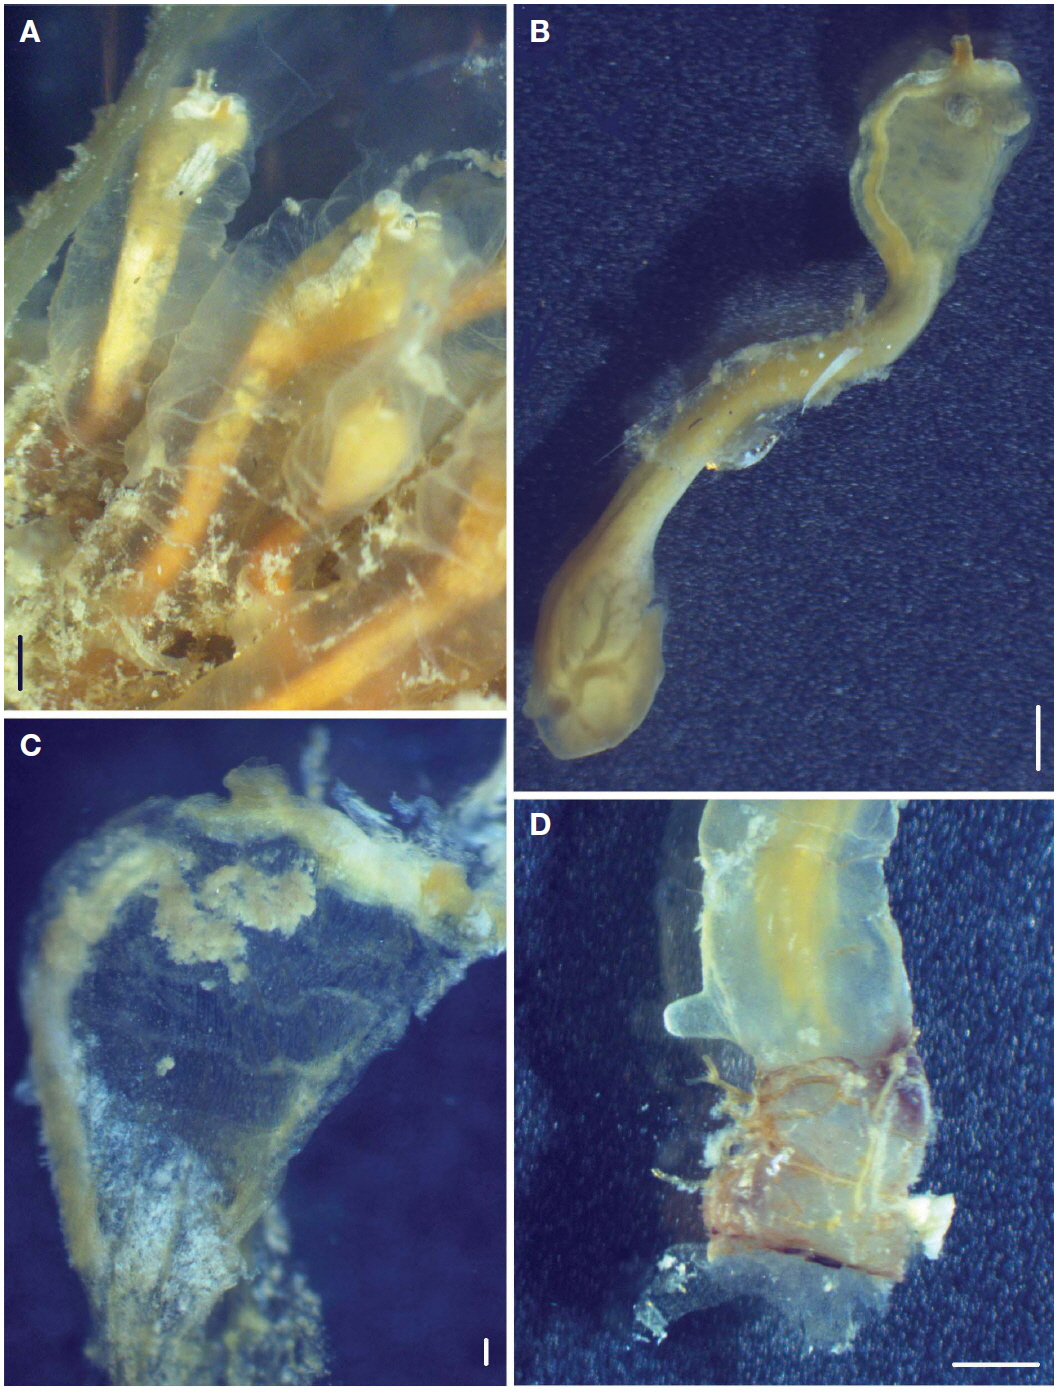 Clavelina miniata. A, Colony in preservative; B, Contracted zooid in preservative; C, Expanded thorax; D, Terminal of abdomen. Scale bars: A, B, D=1 mm, C=0.2 mm.